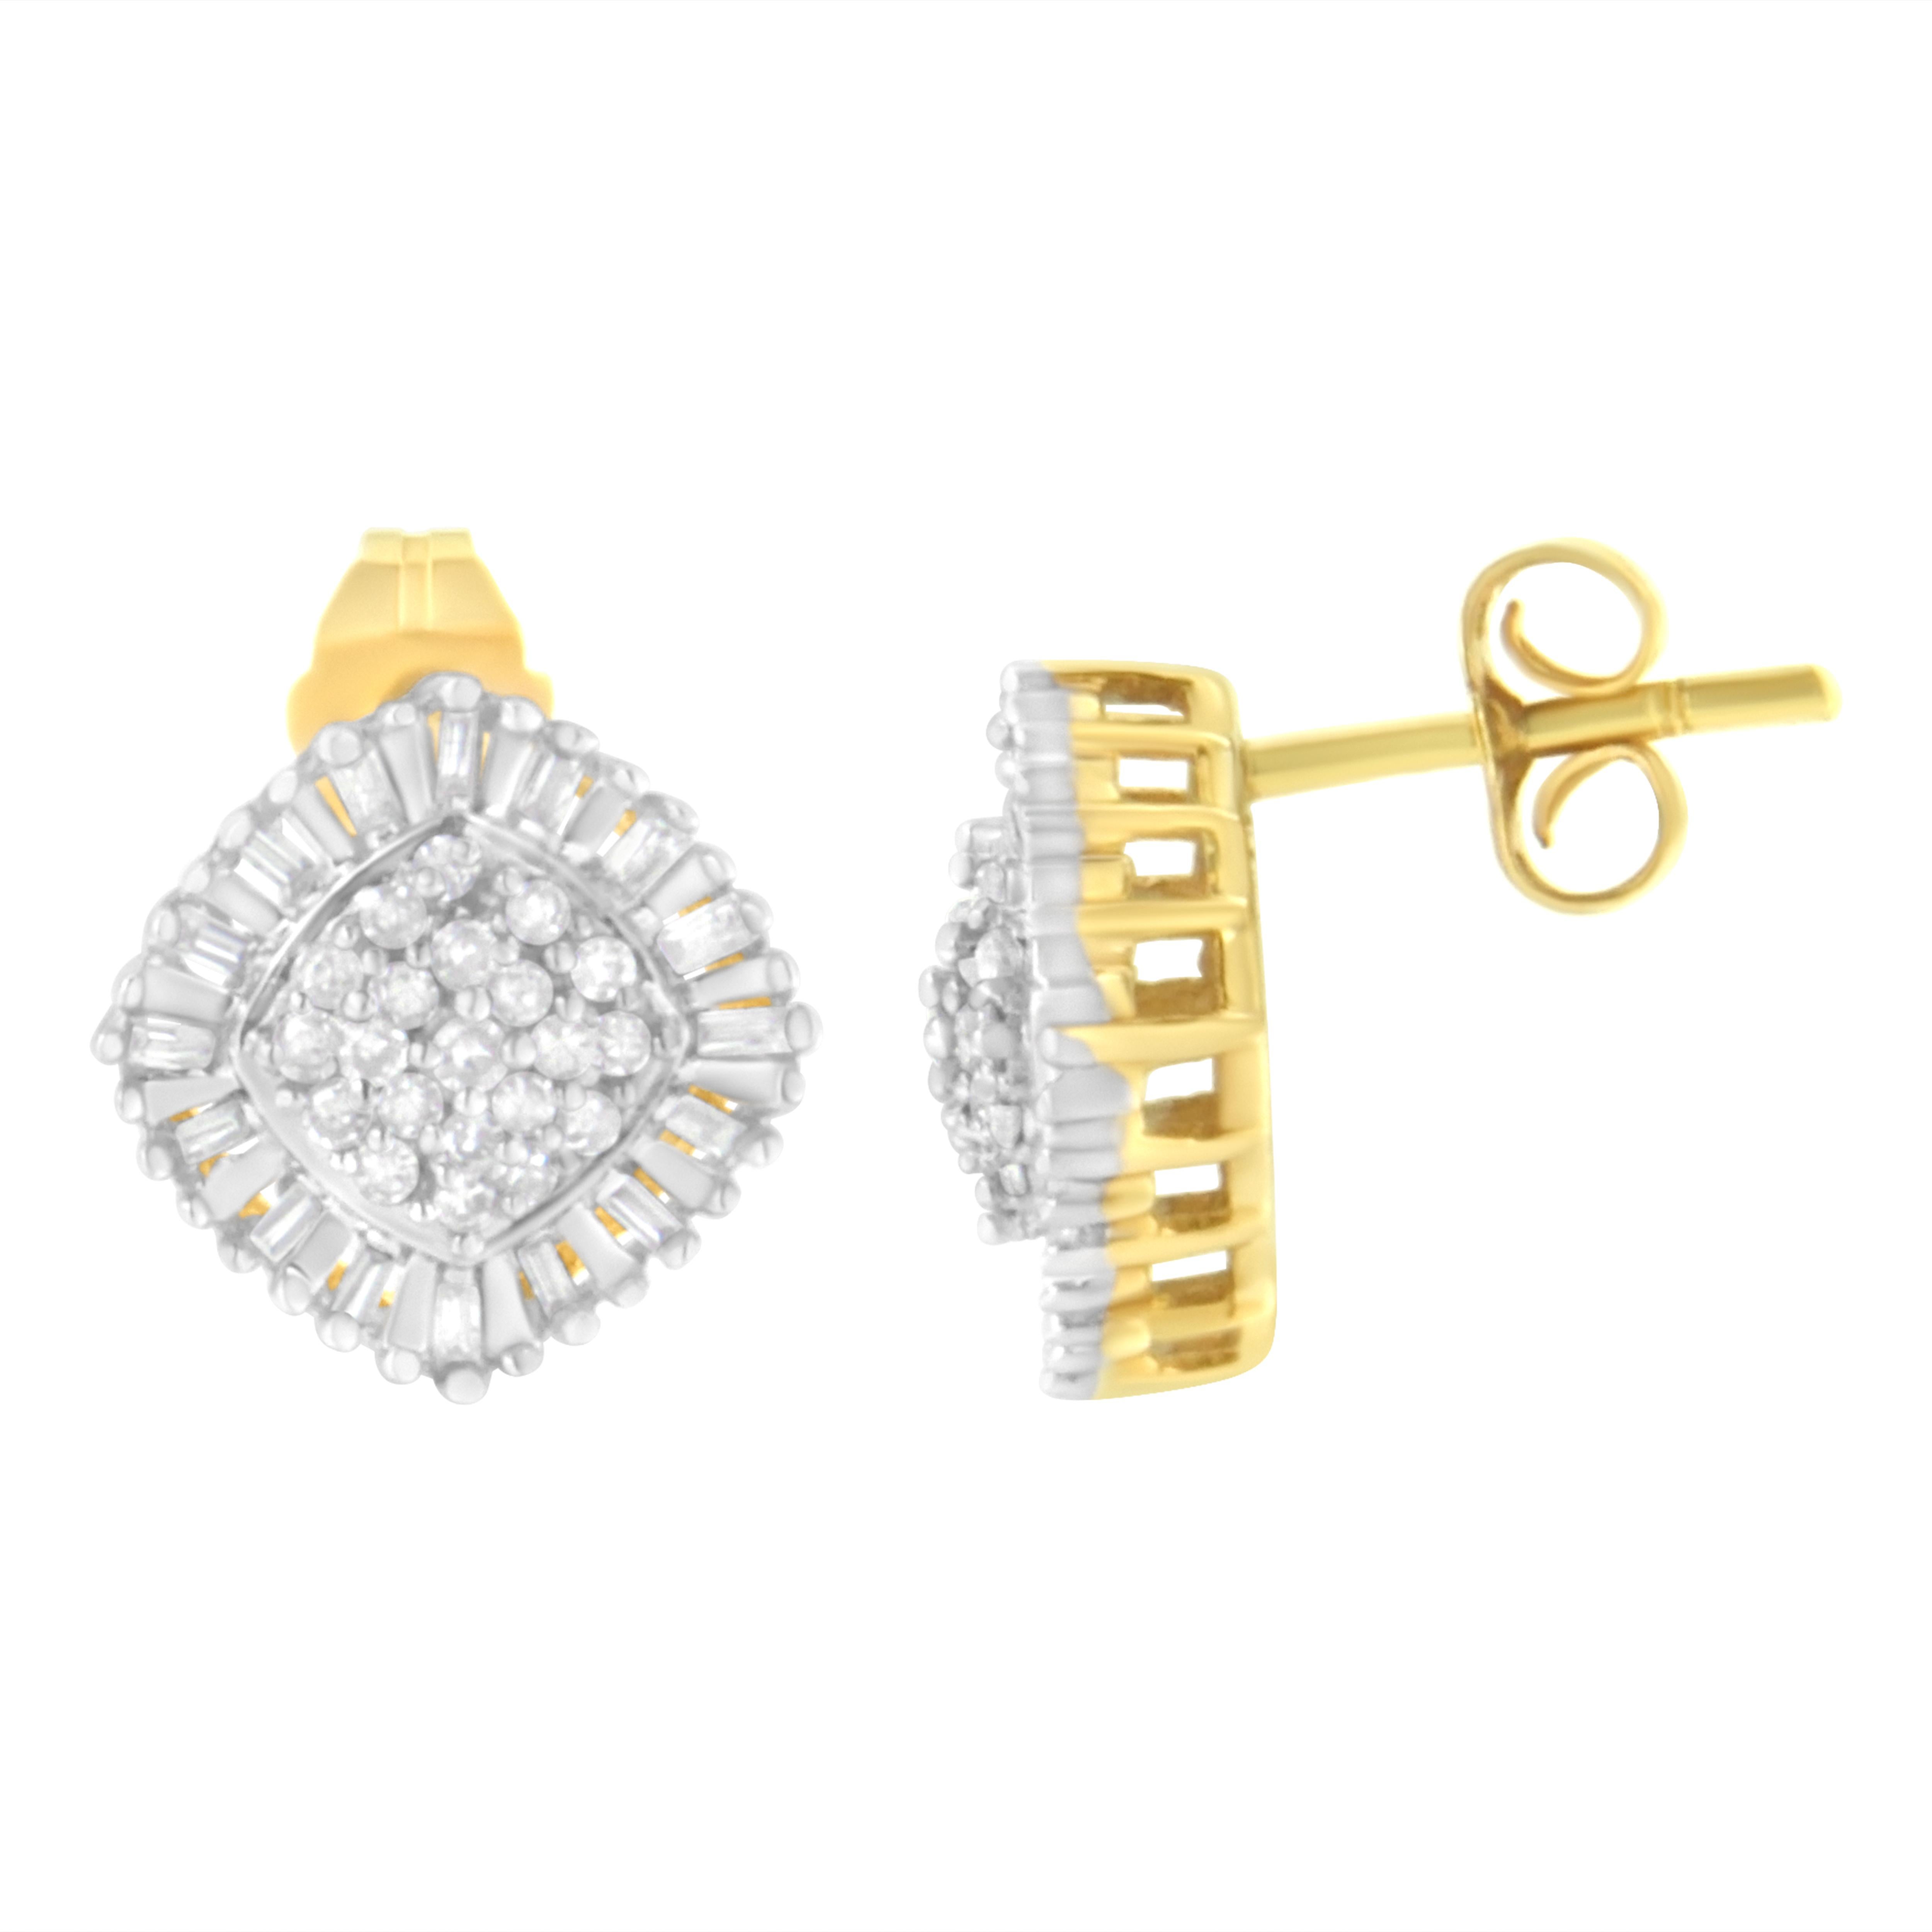 These stunning cluster earrings sparkle with 1/2ct TDW of diamonds. A round diamond cluster is surrounded by a baguette diamond halo. These 10k yellow gold stud earrings are the perfect complement for any outfit. A push back mechanism keeps the